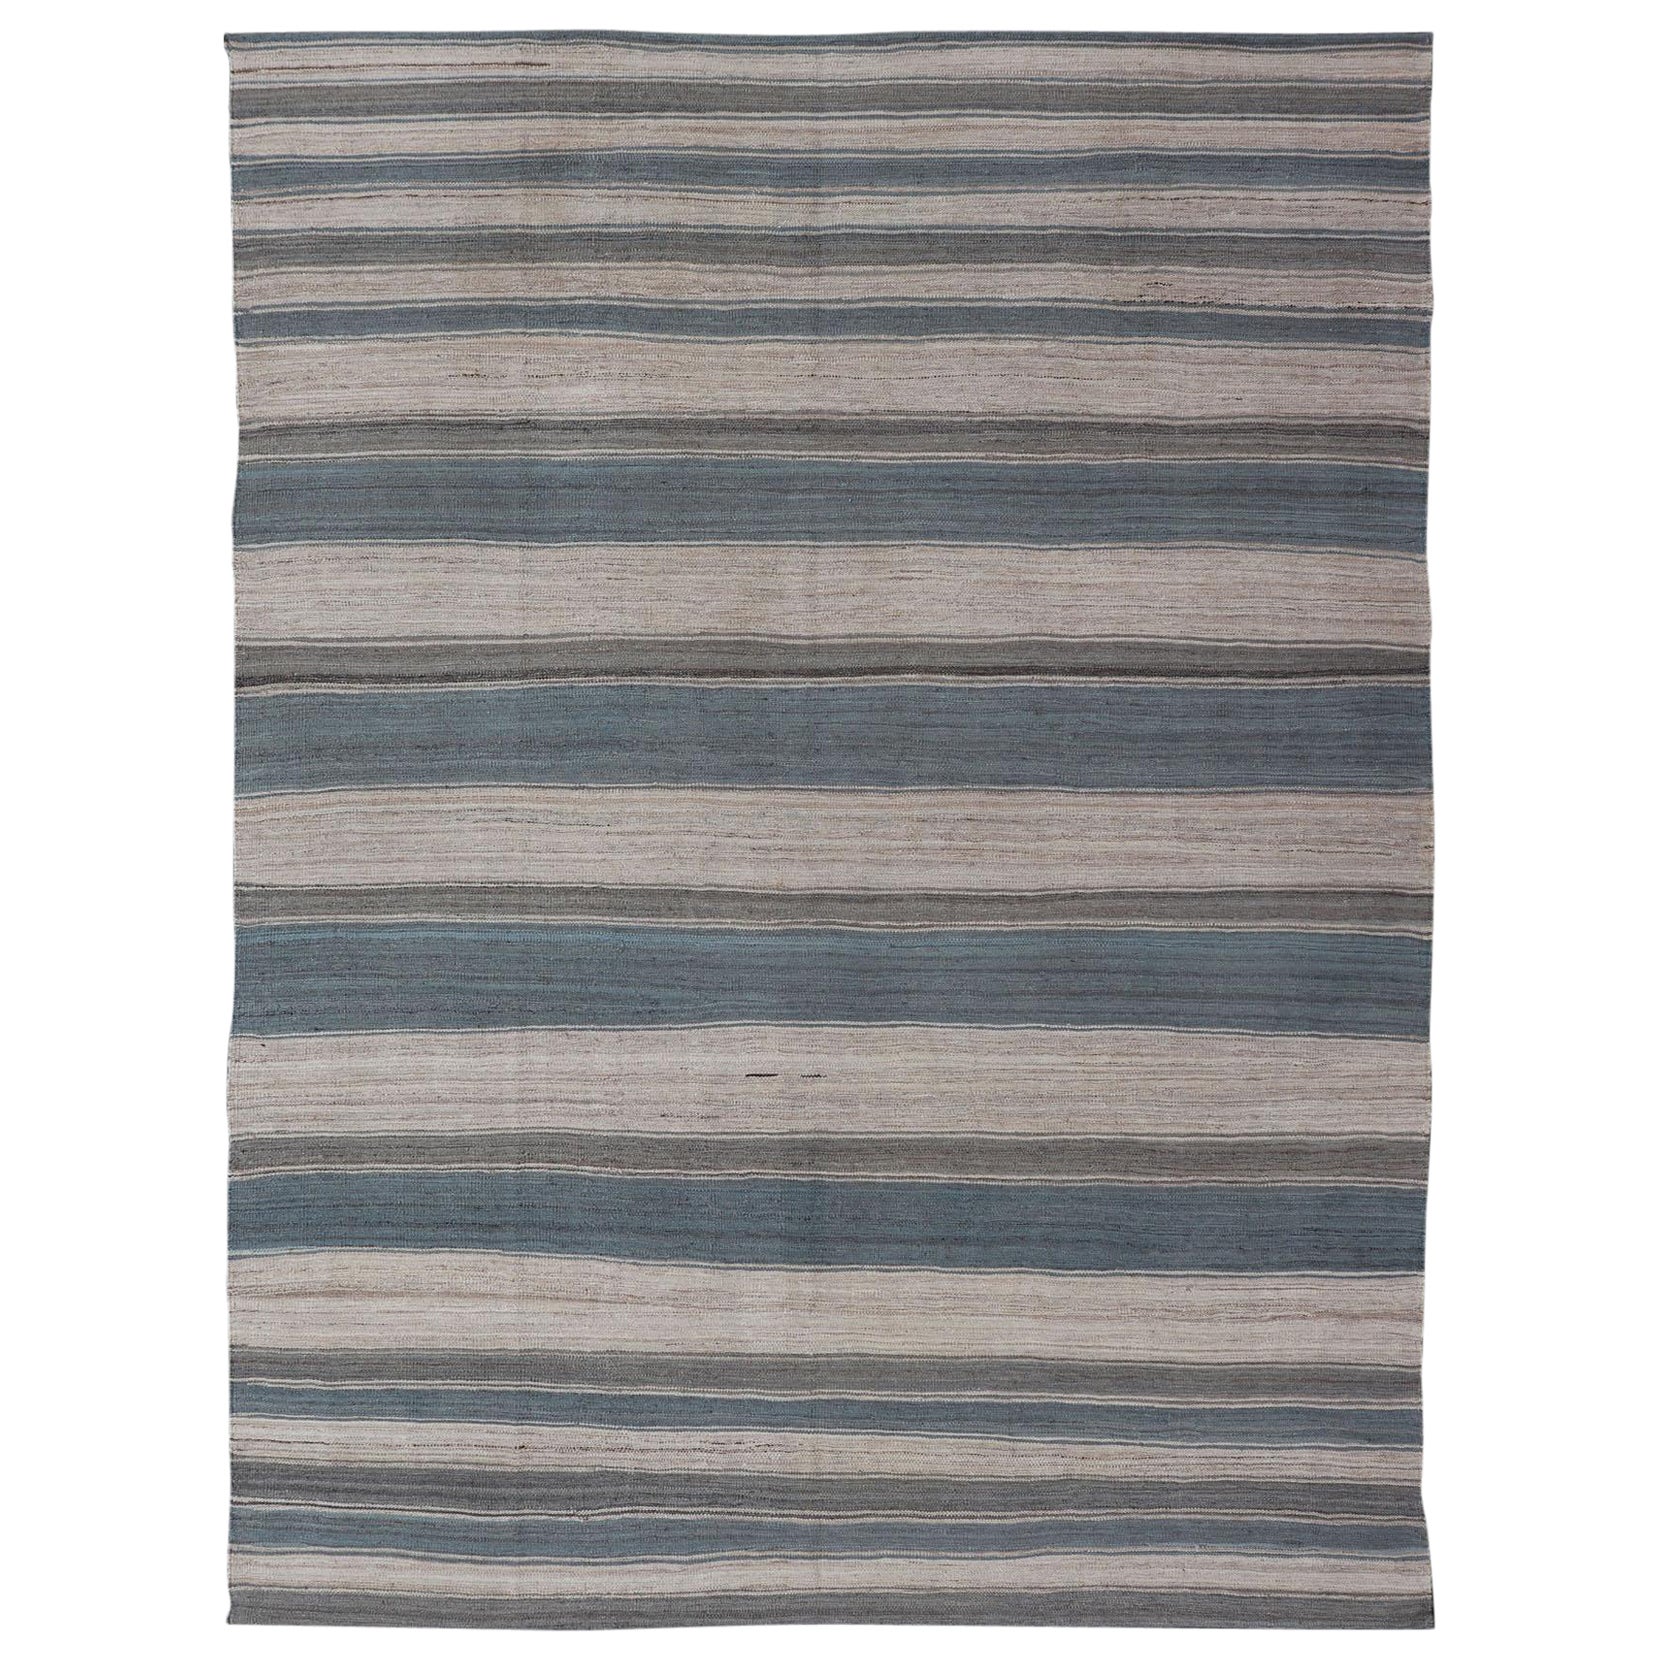 Flat-Weave Modern Kilim Rug with Stripes in Shades of Blue, Charcoal and Ivory